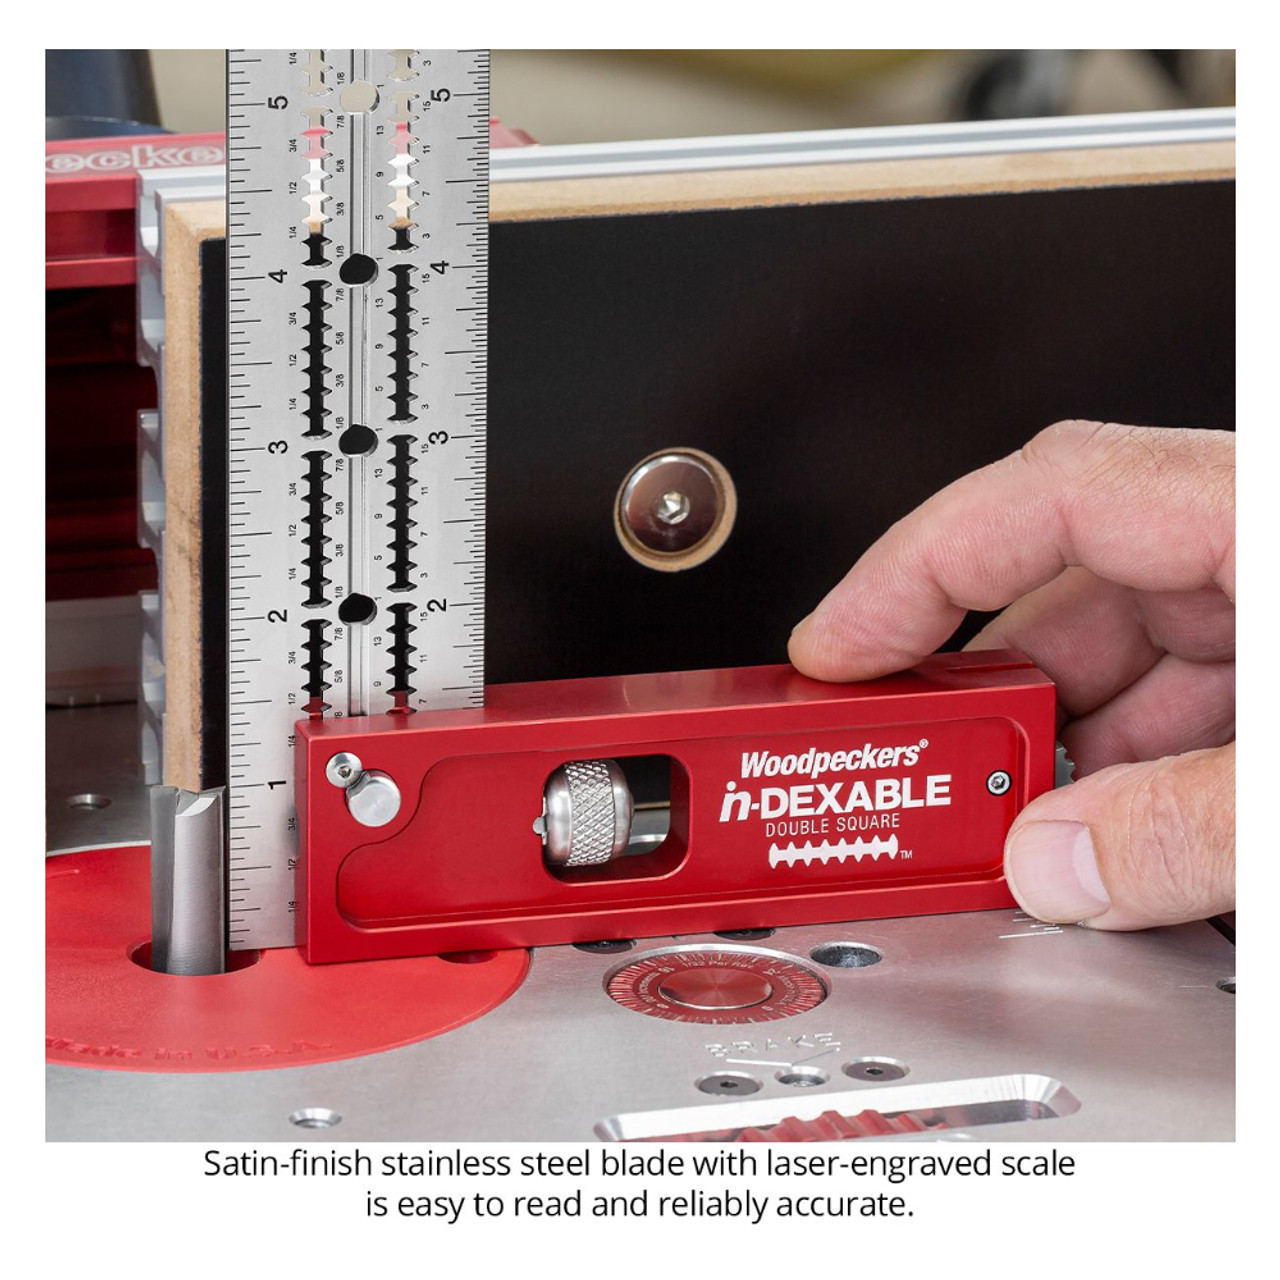 12 Inch Center Finder Rule - Woodturning Tool Store